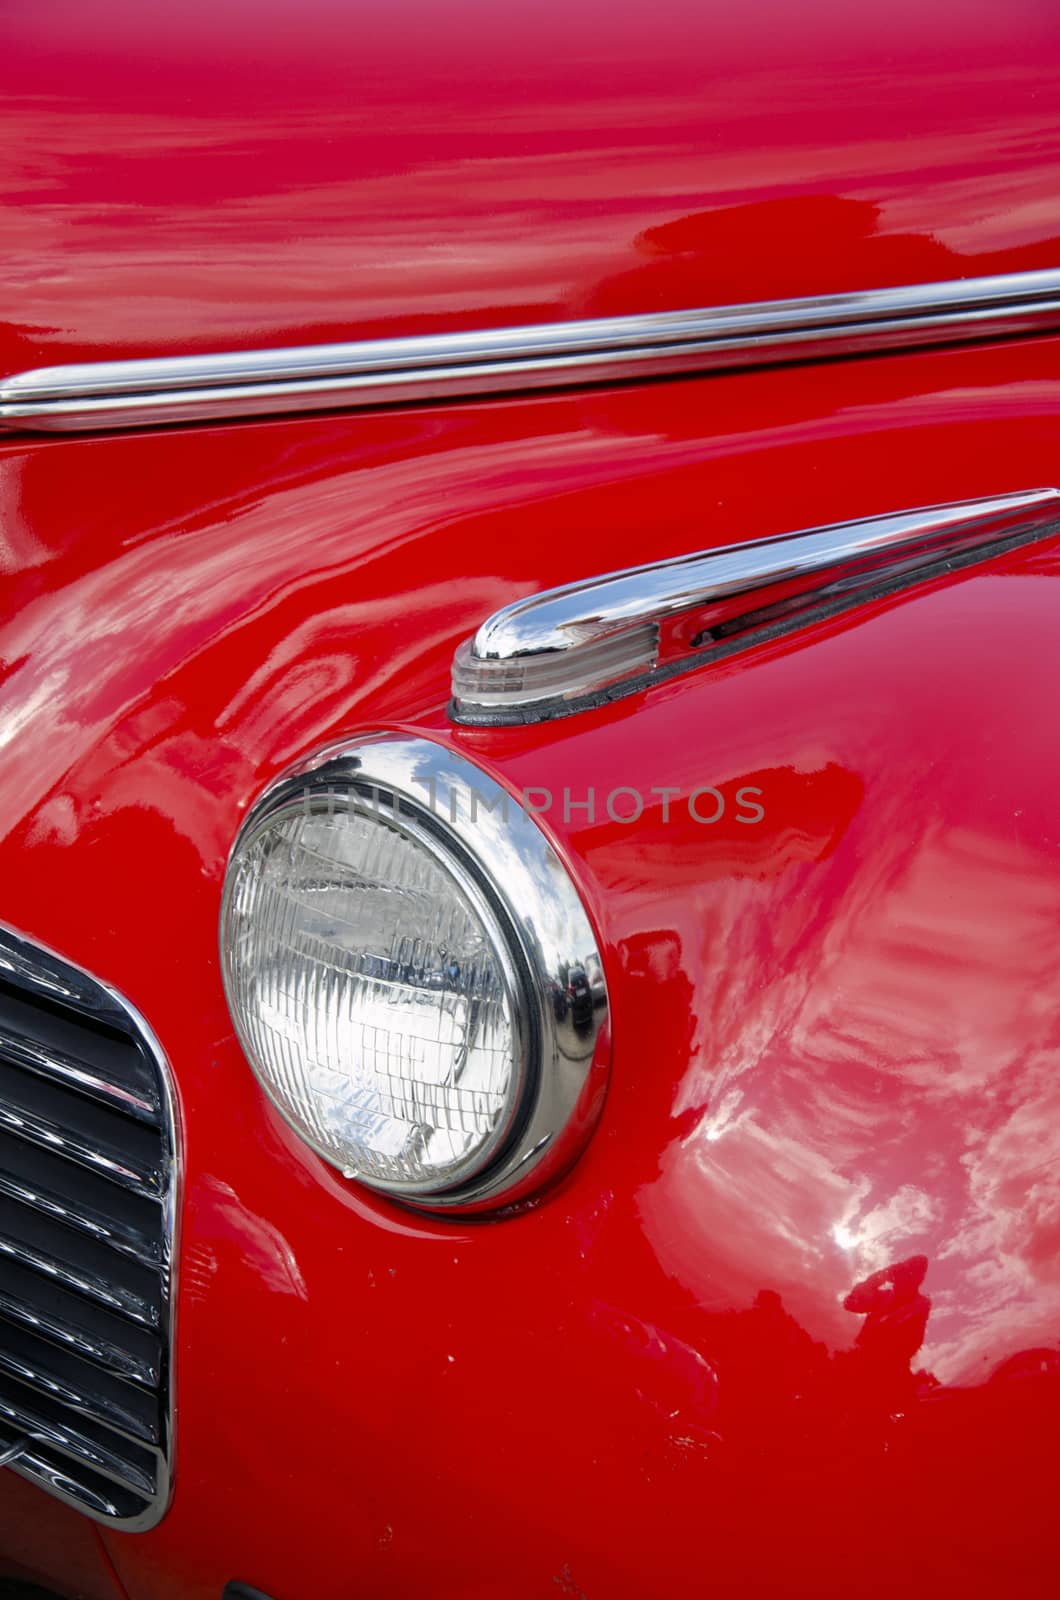 Headlight of antique red car